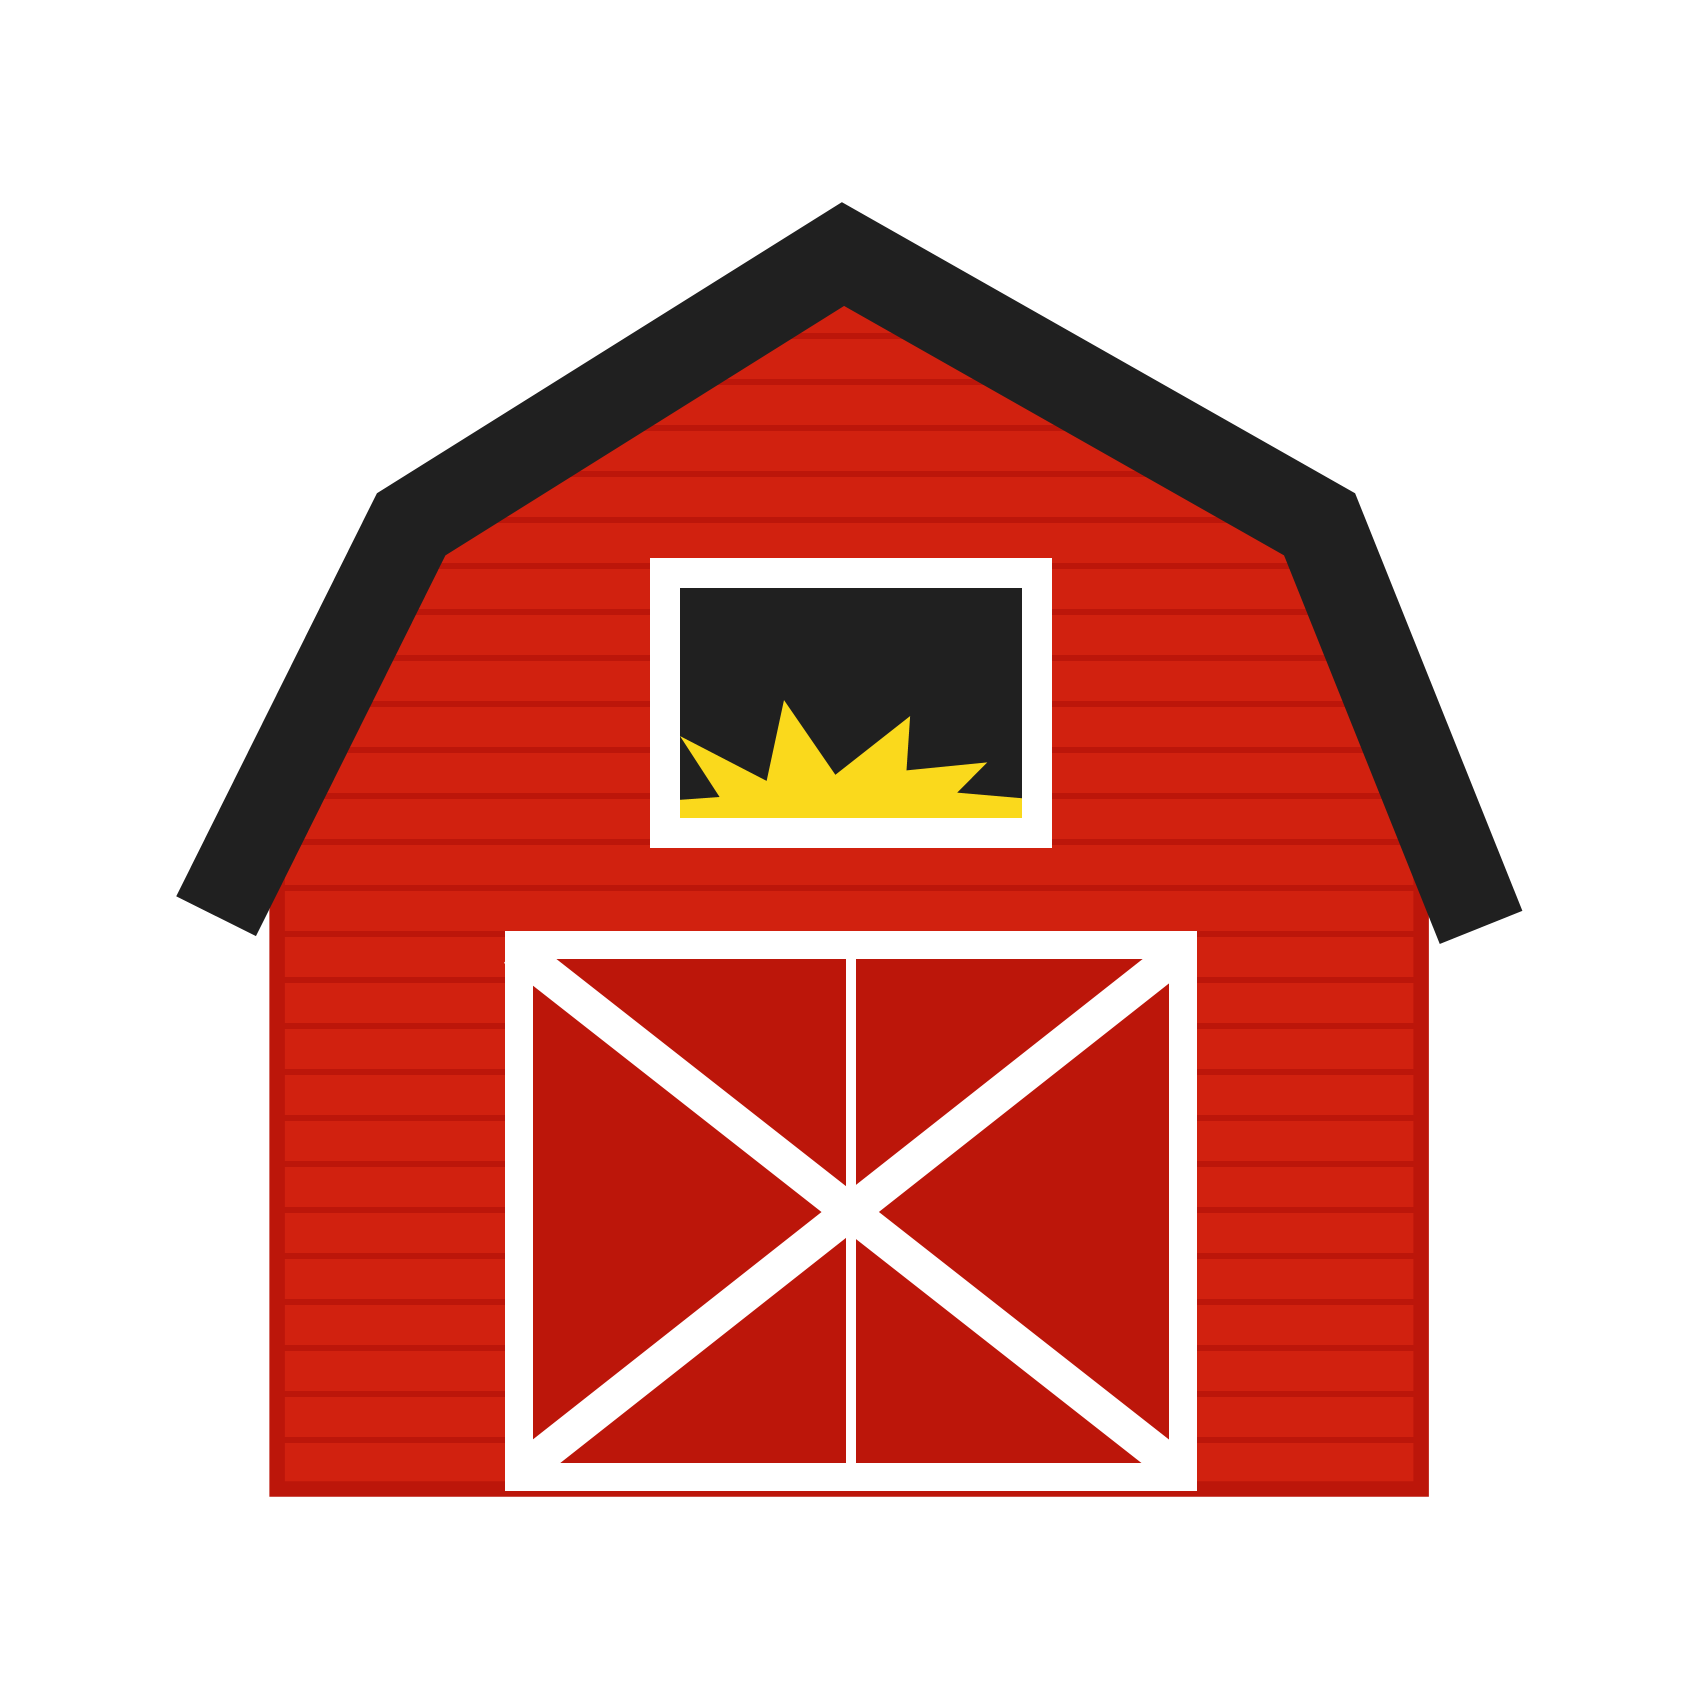 Sheep clipart shed. Unique red barn coloring